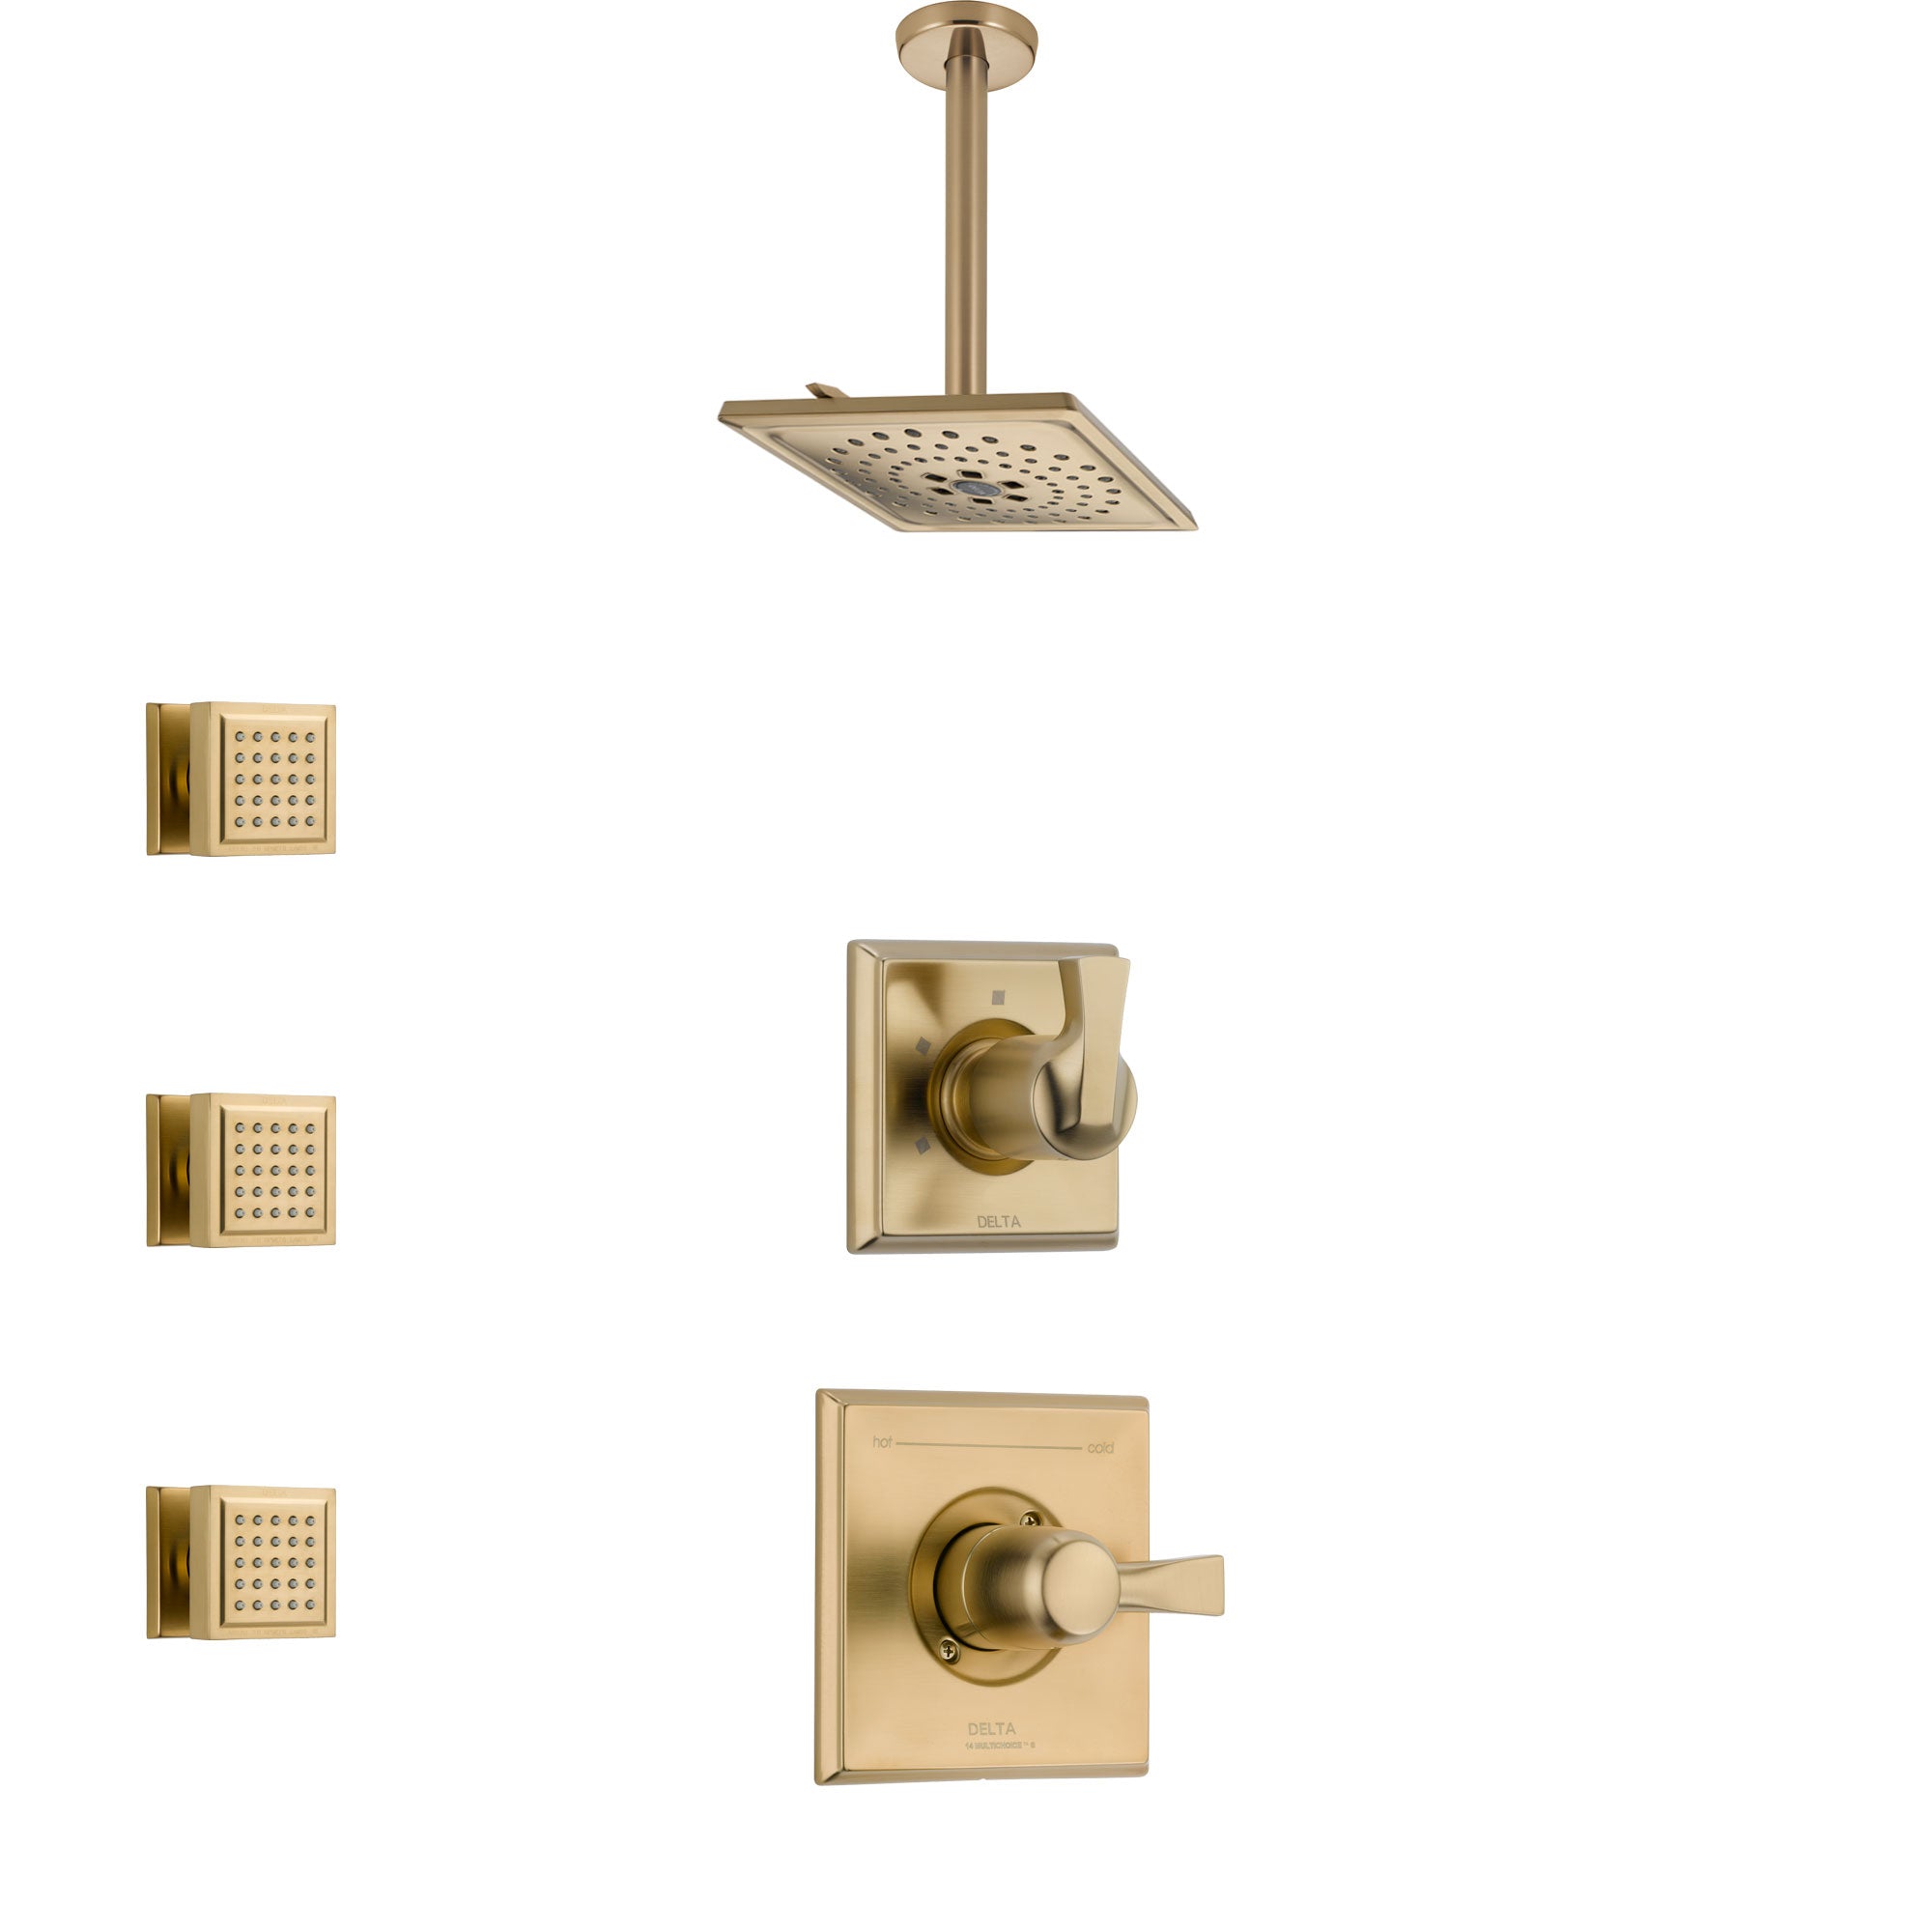 Delta Dryden Champagne Bronze Finish Shower System with Control Handle, 3-Setting Diverter, Ceiling Mount Showerhead, and 3 Body Sprays SS1451CZ8